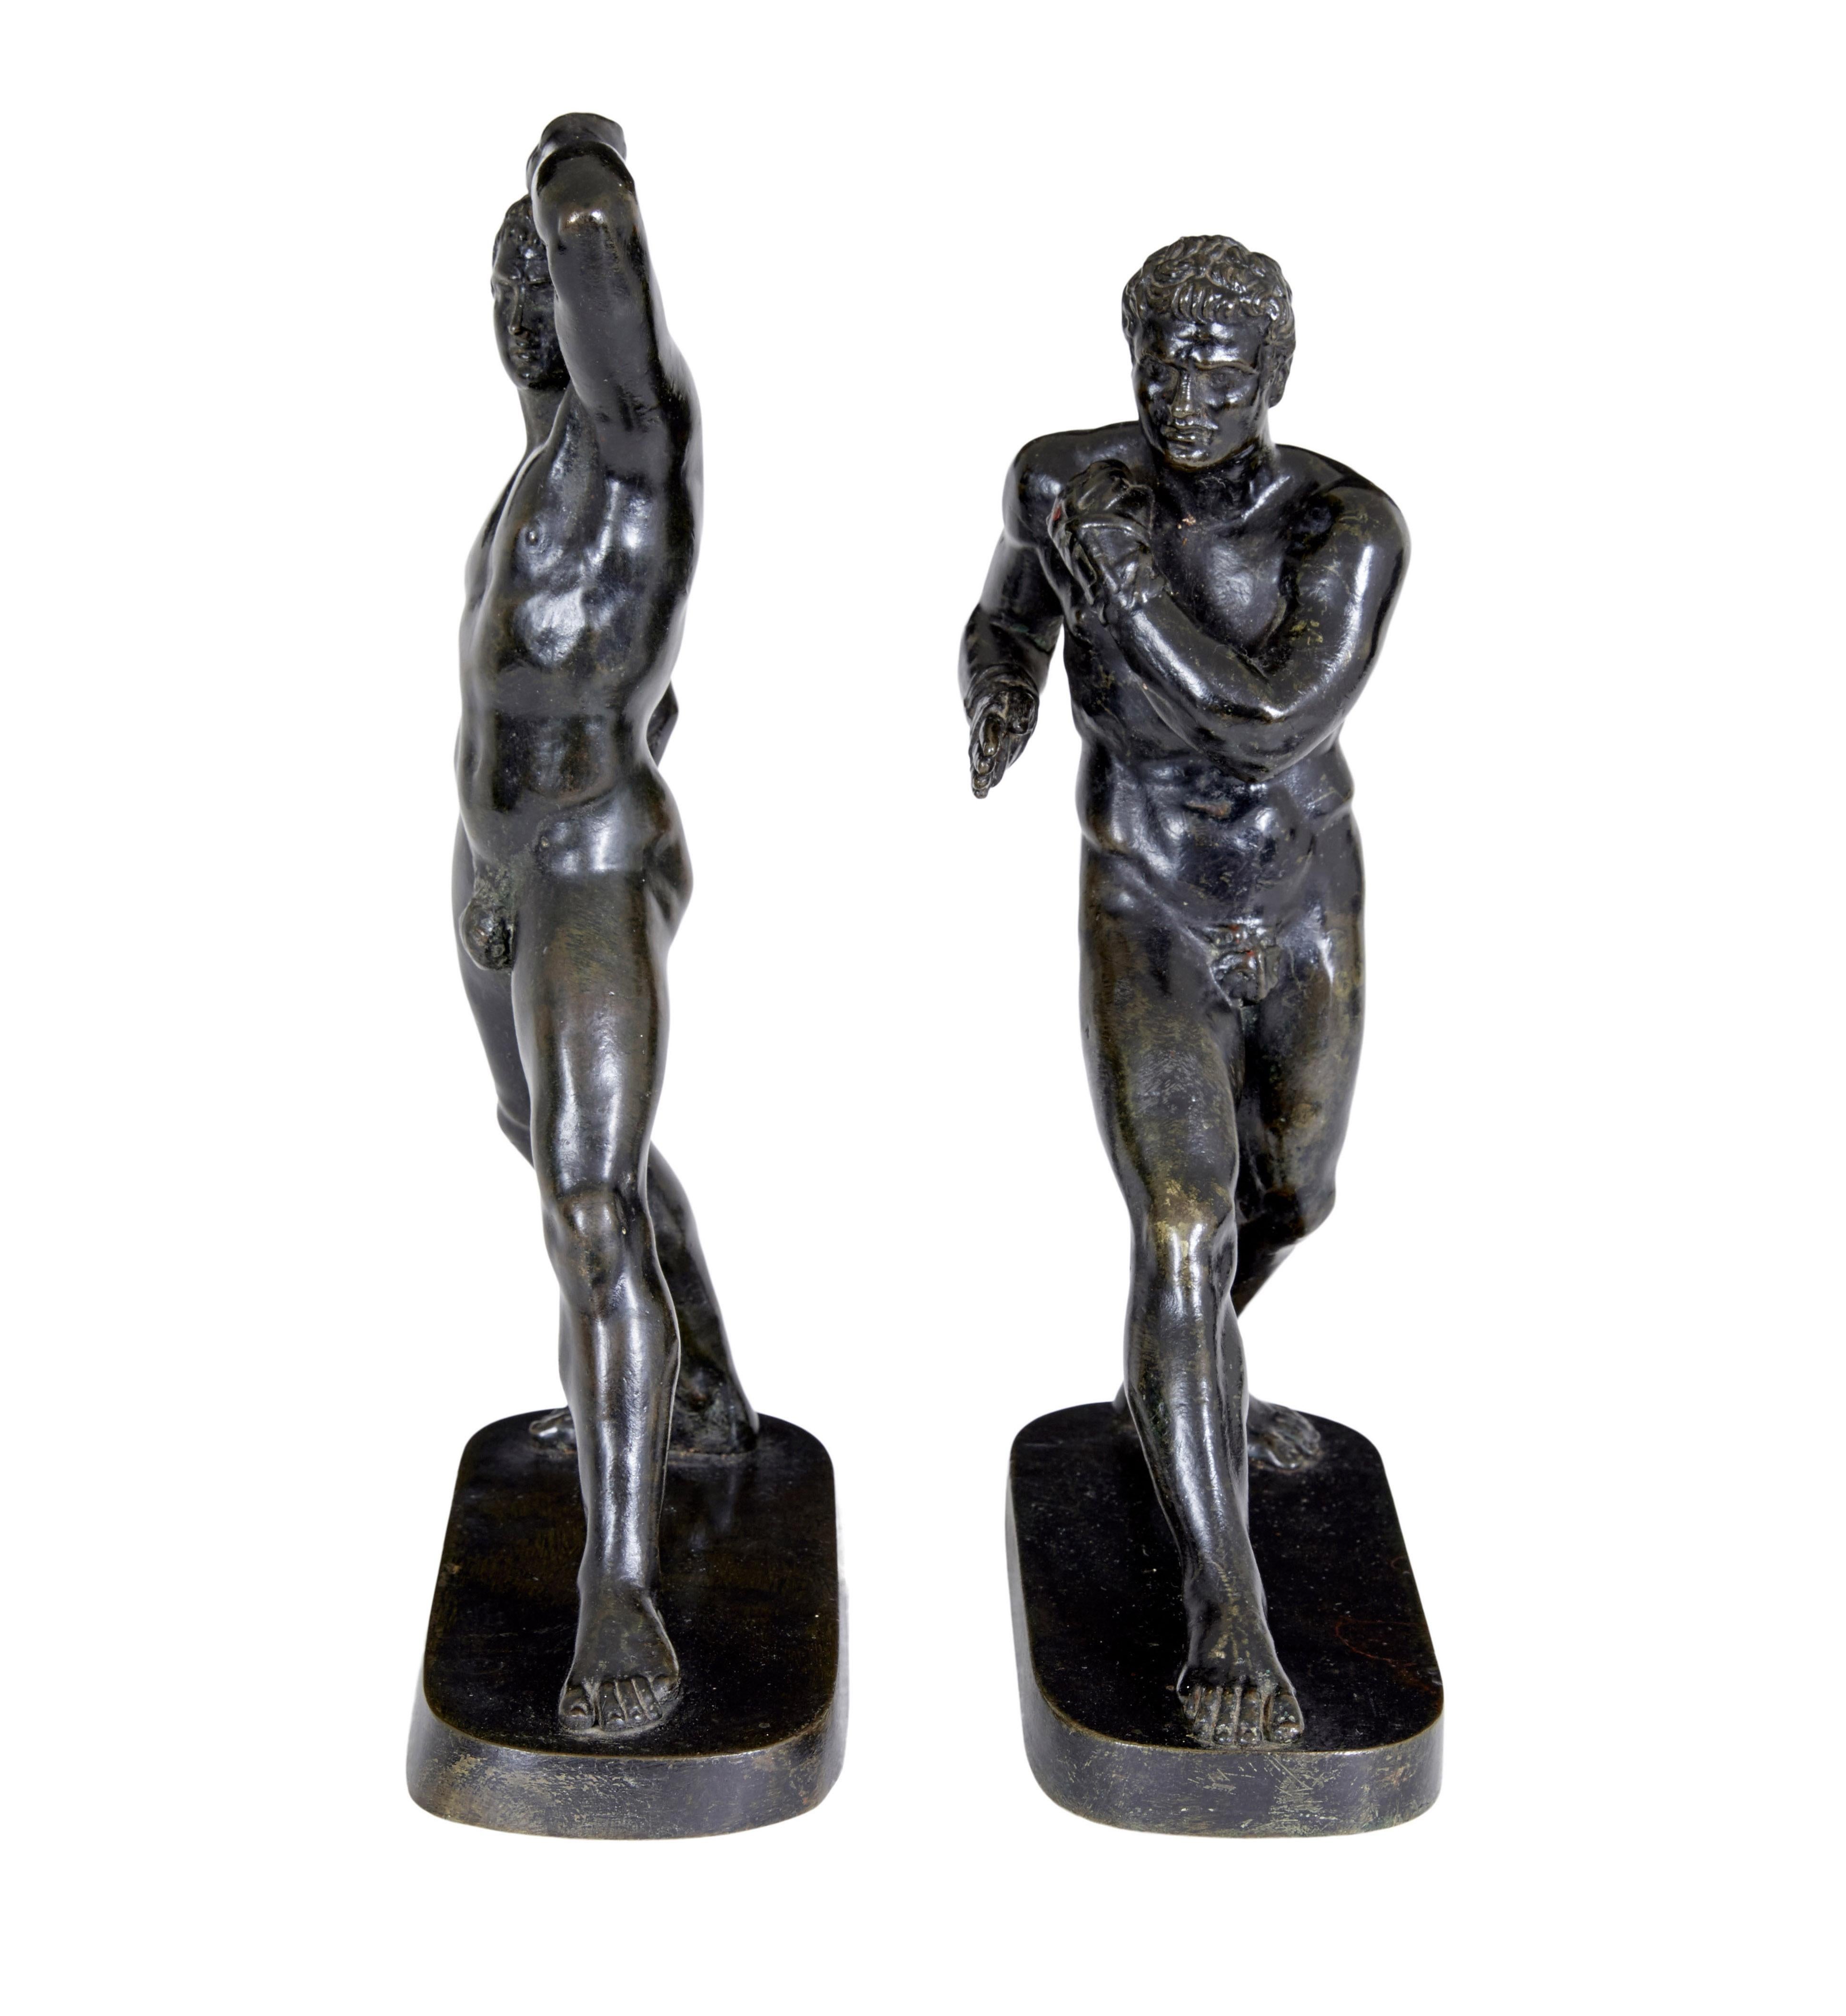 Pair of 19th century bronze athlete figures after Canova circa 1880.

Good quality pair of decorative bronzes with good patina.  Showing 2 types of athletic poses, one of which is wearing strap protection to his hands.

Very slight size